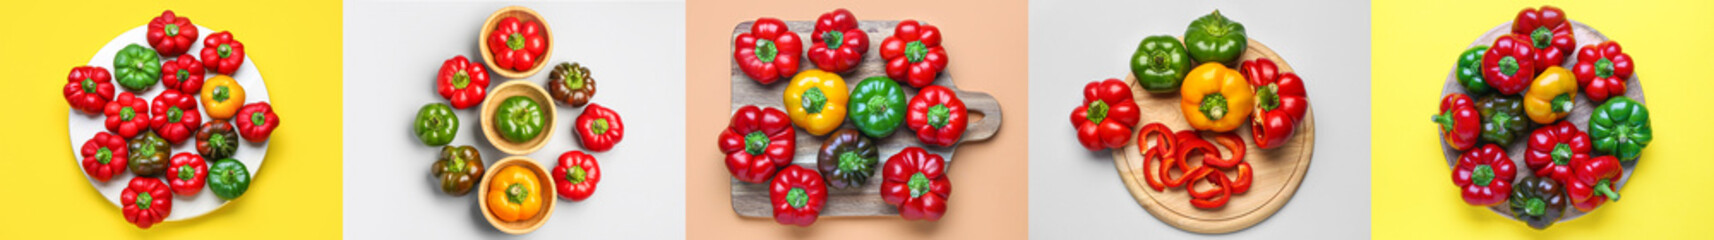 Collage with many bell peppers on colorful background